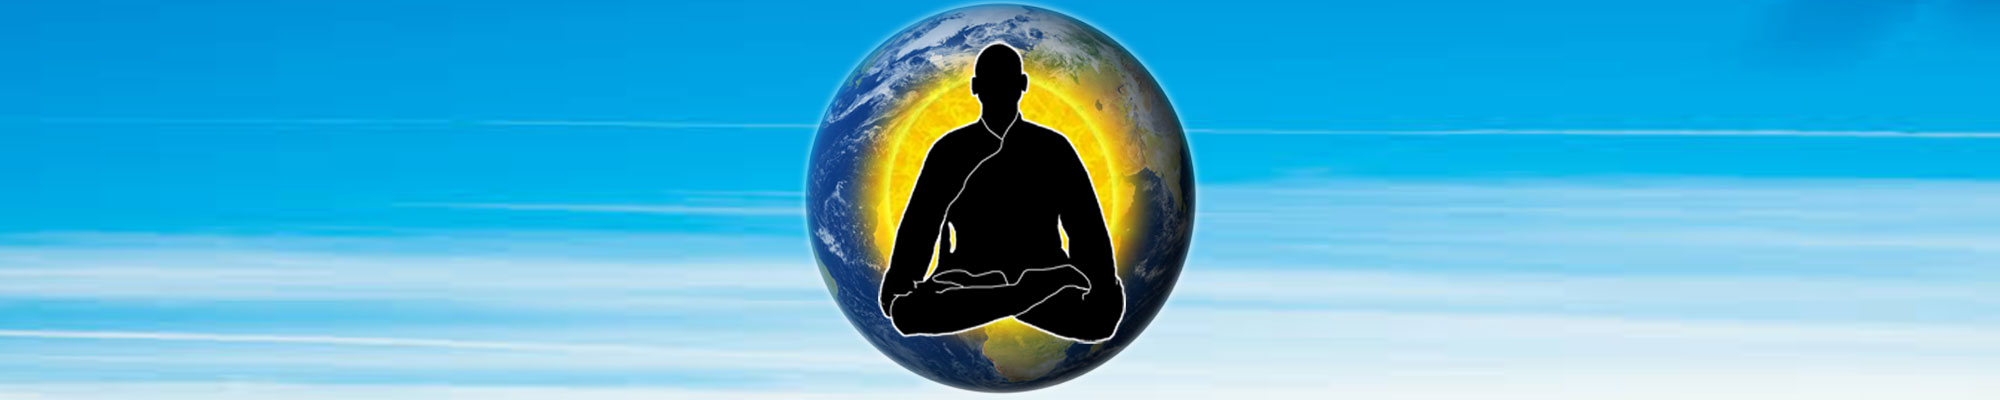 Online QiGong Energy Courses for Health Wellness and Consciousness Expansion